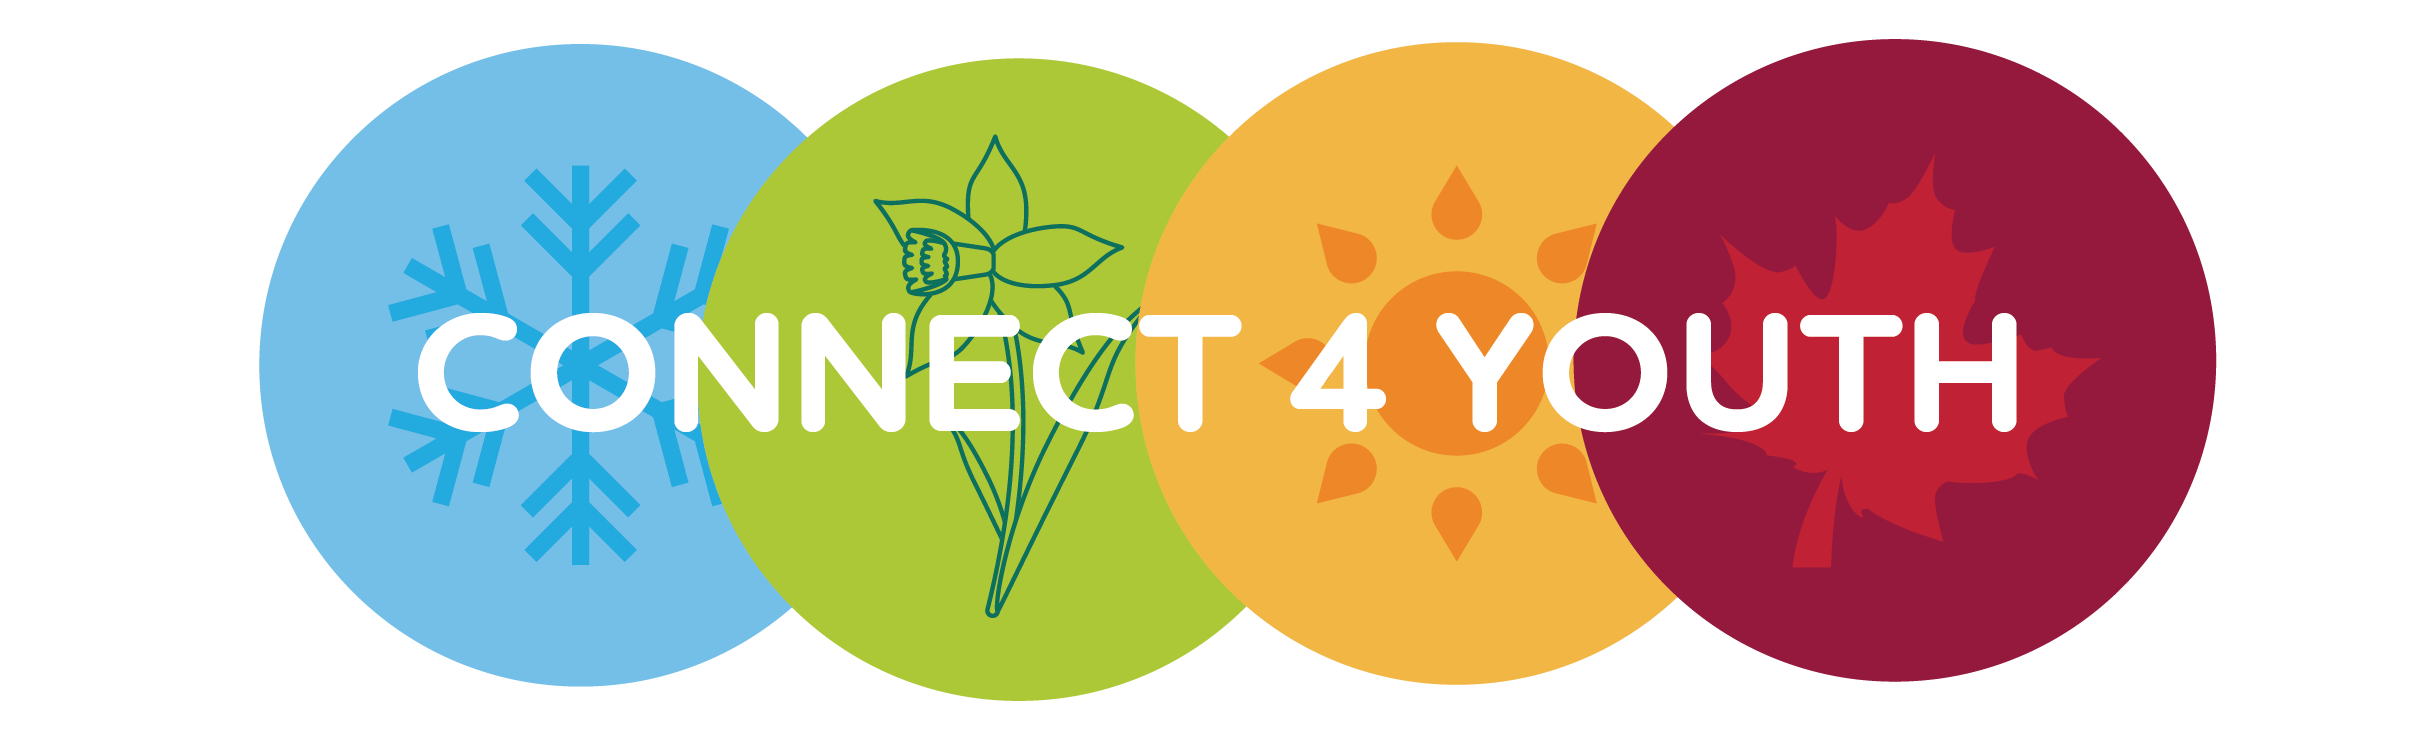 Connect 4 Youth